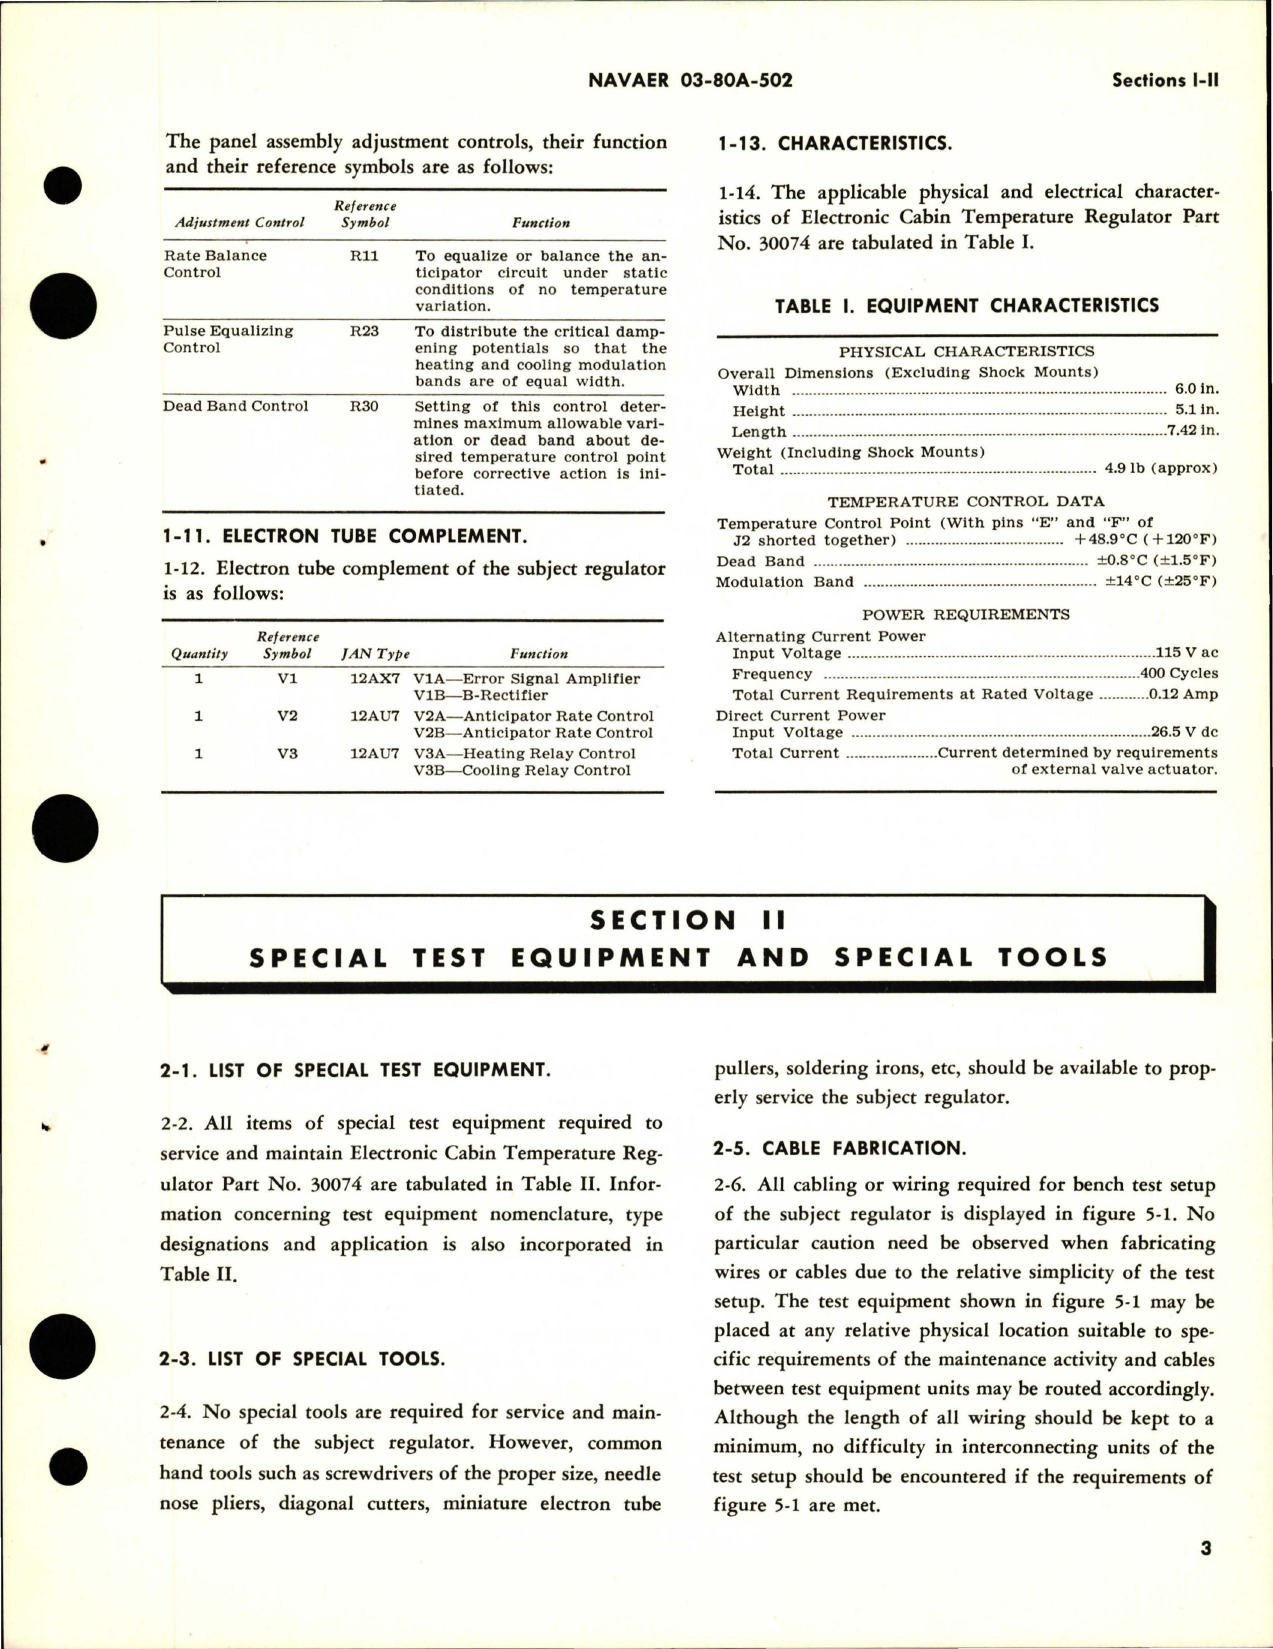 Sample page 7 from AirCorps Library document: Service Instructions for Electronic Cabin Temperature Regulator - Part 30074